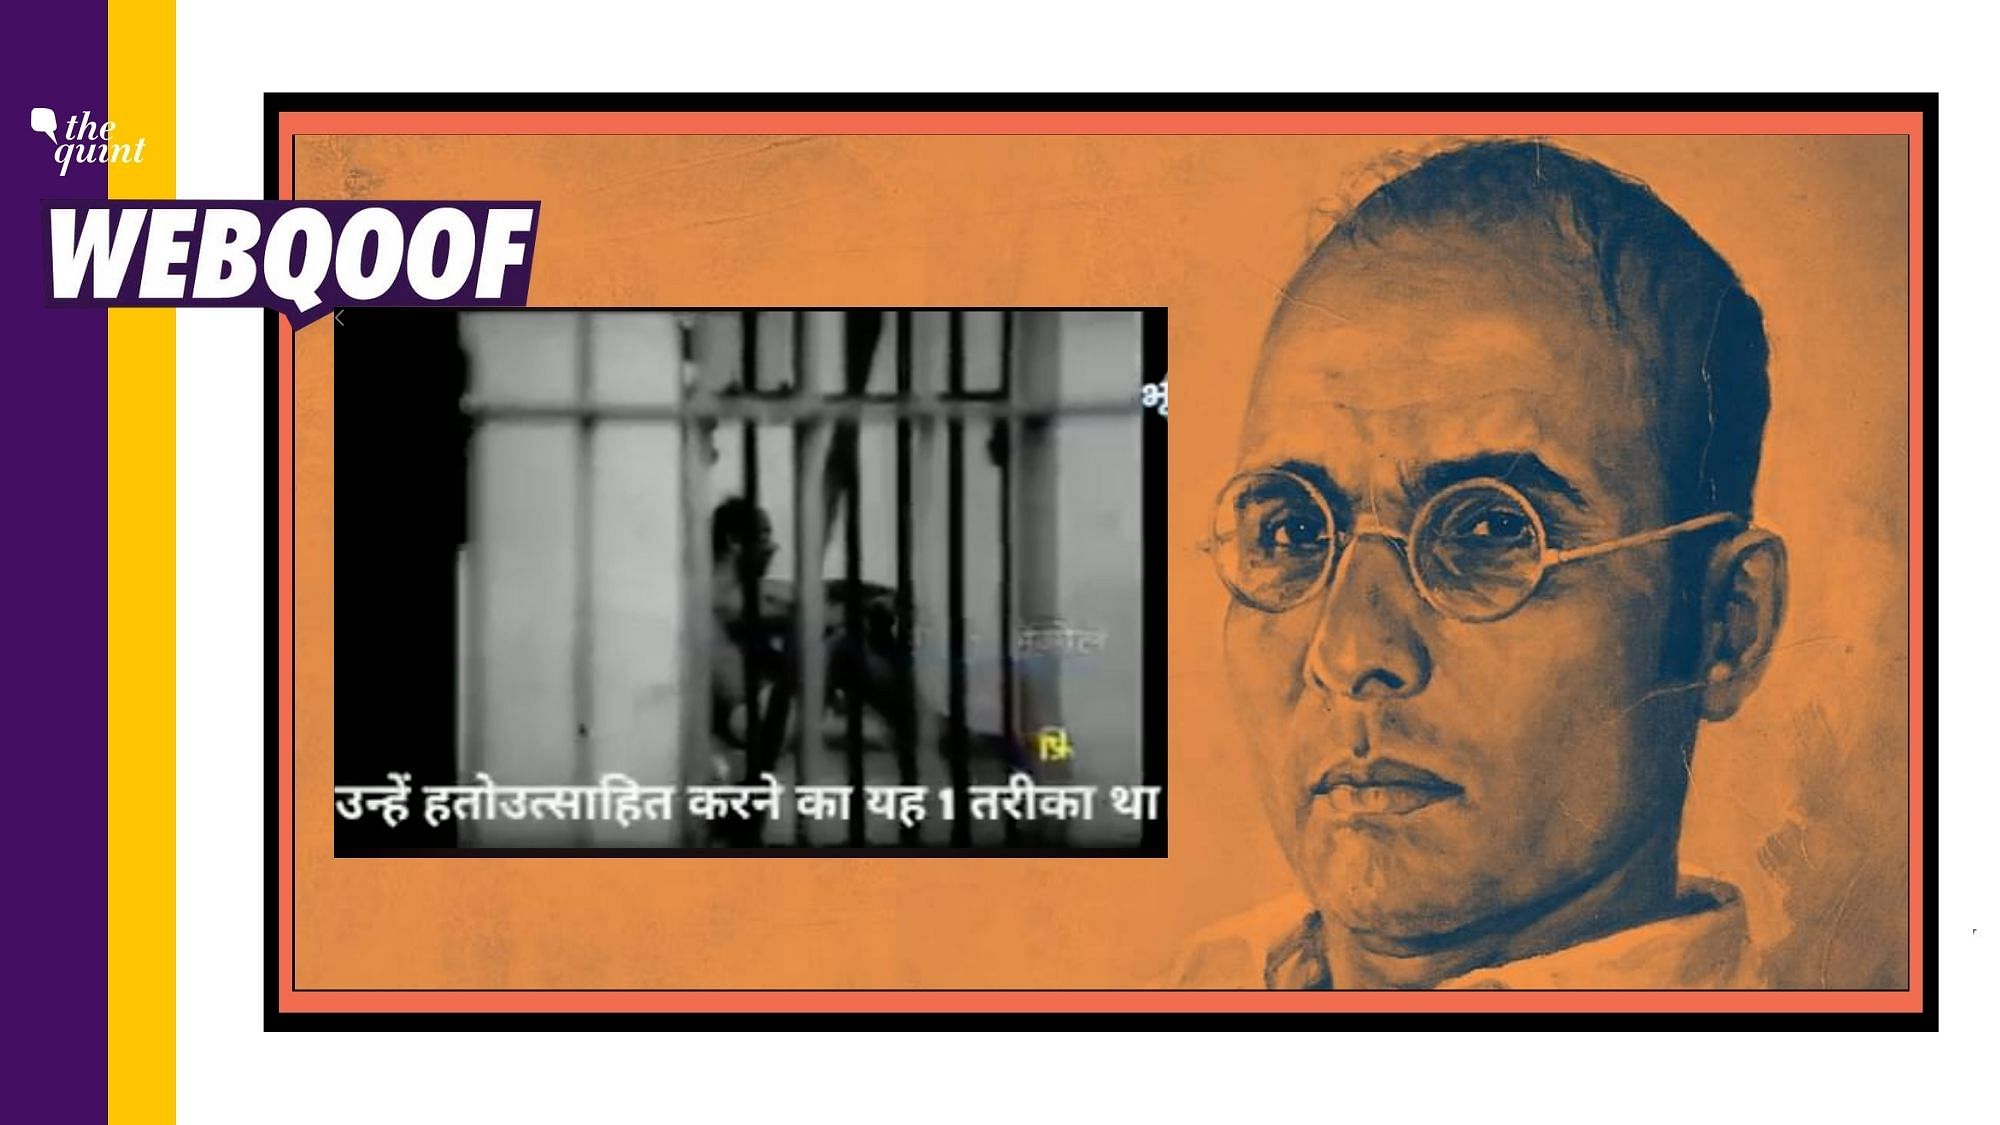 The viral video has extracted certain footages from the 1983 film created by Films Division on the life of Veer Savarkar.